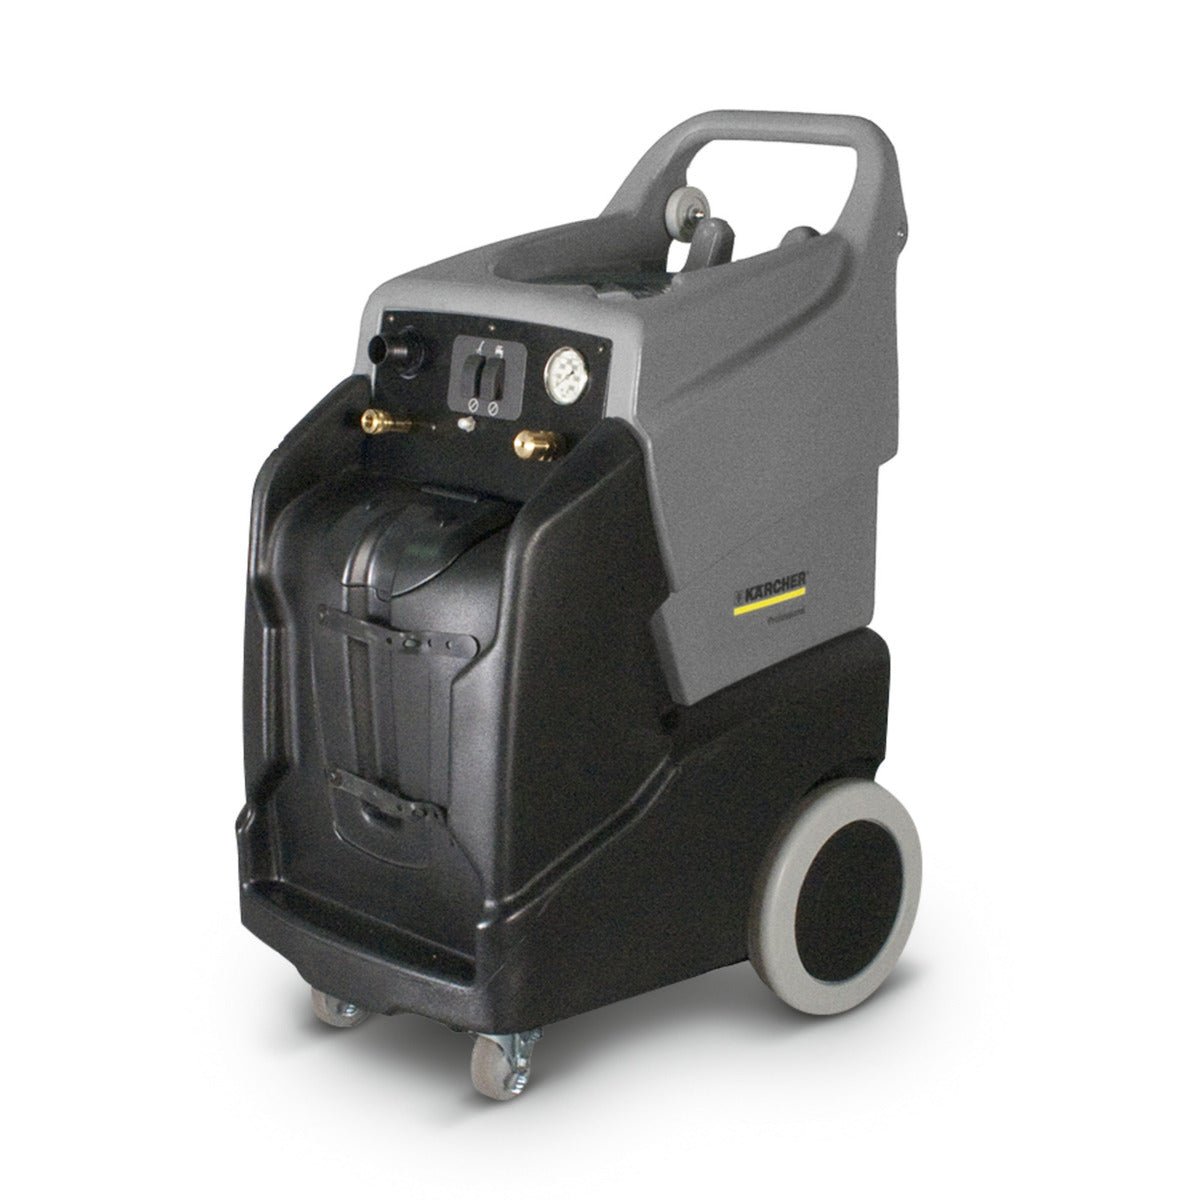 Karcher Spray-extraction cleaner Puzzi 50